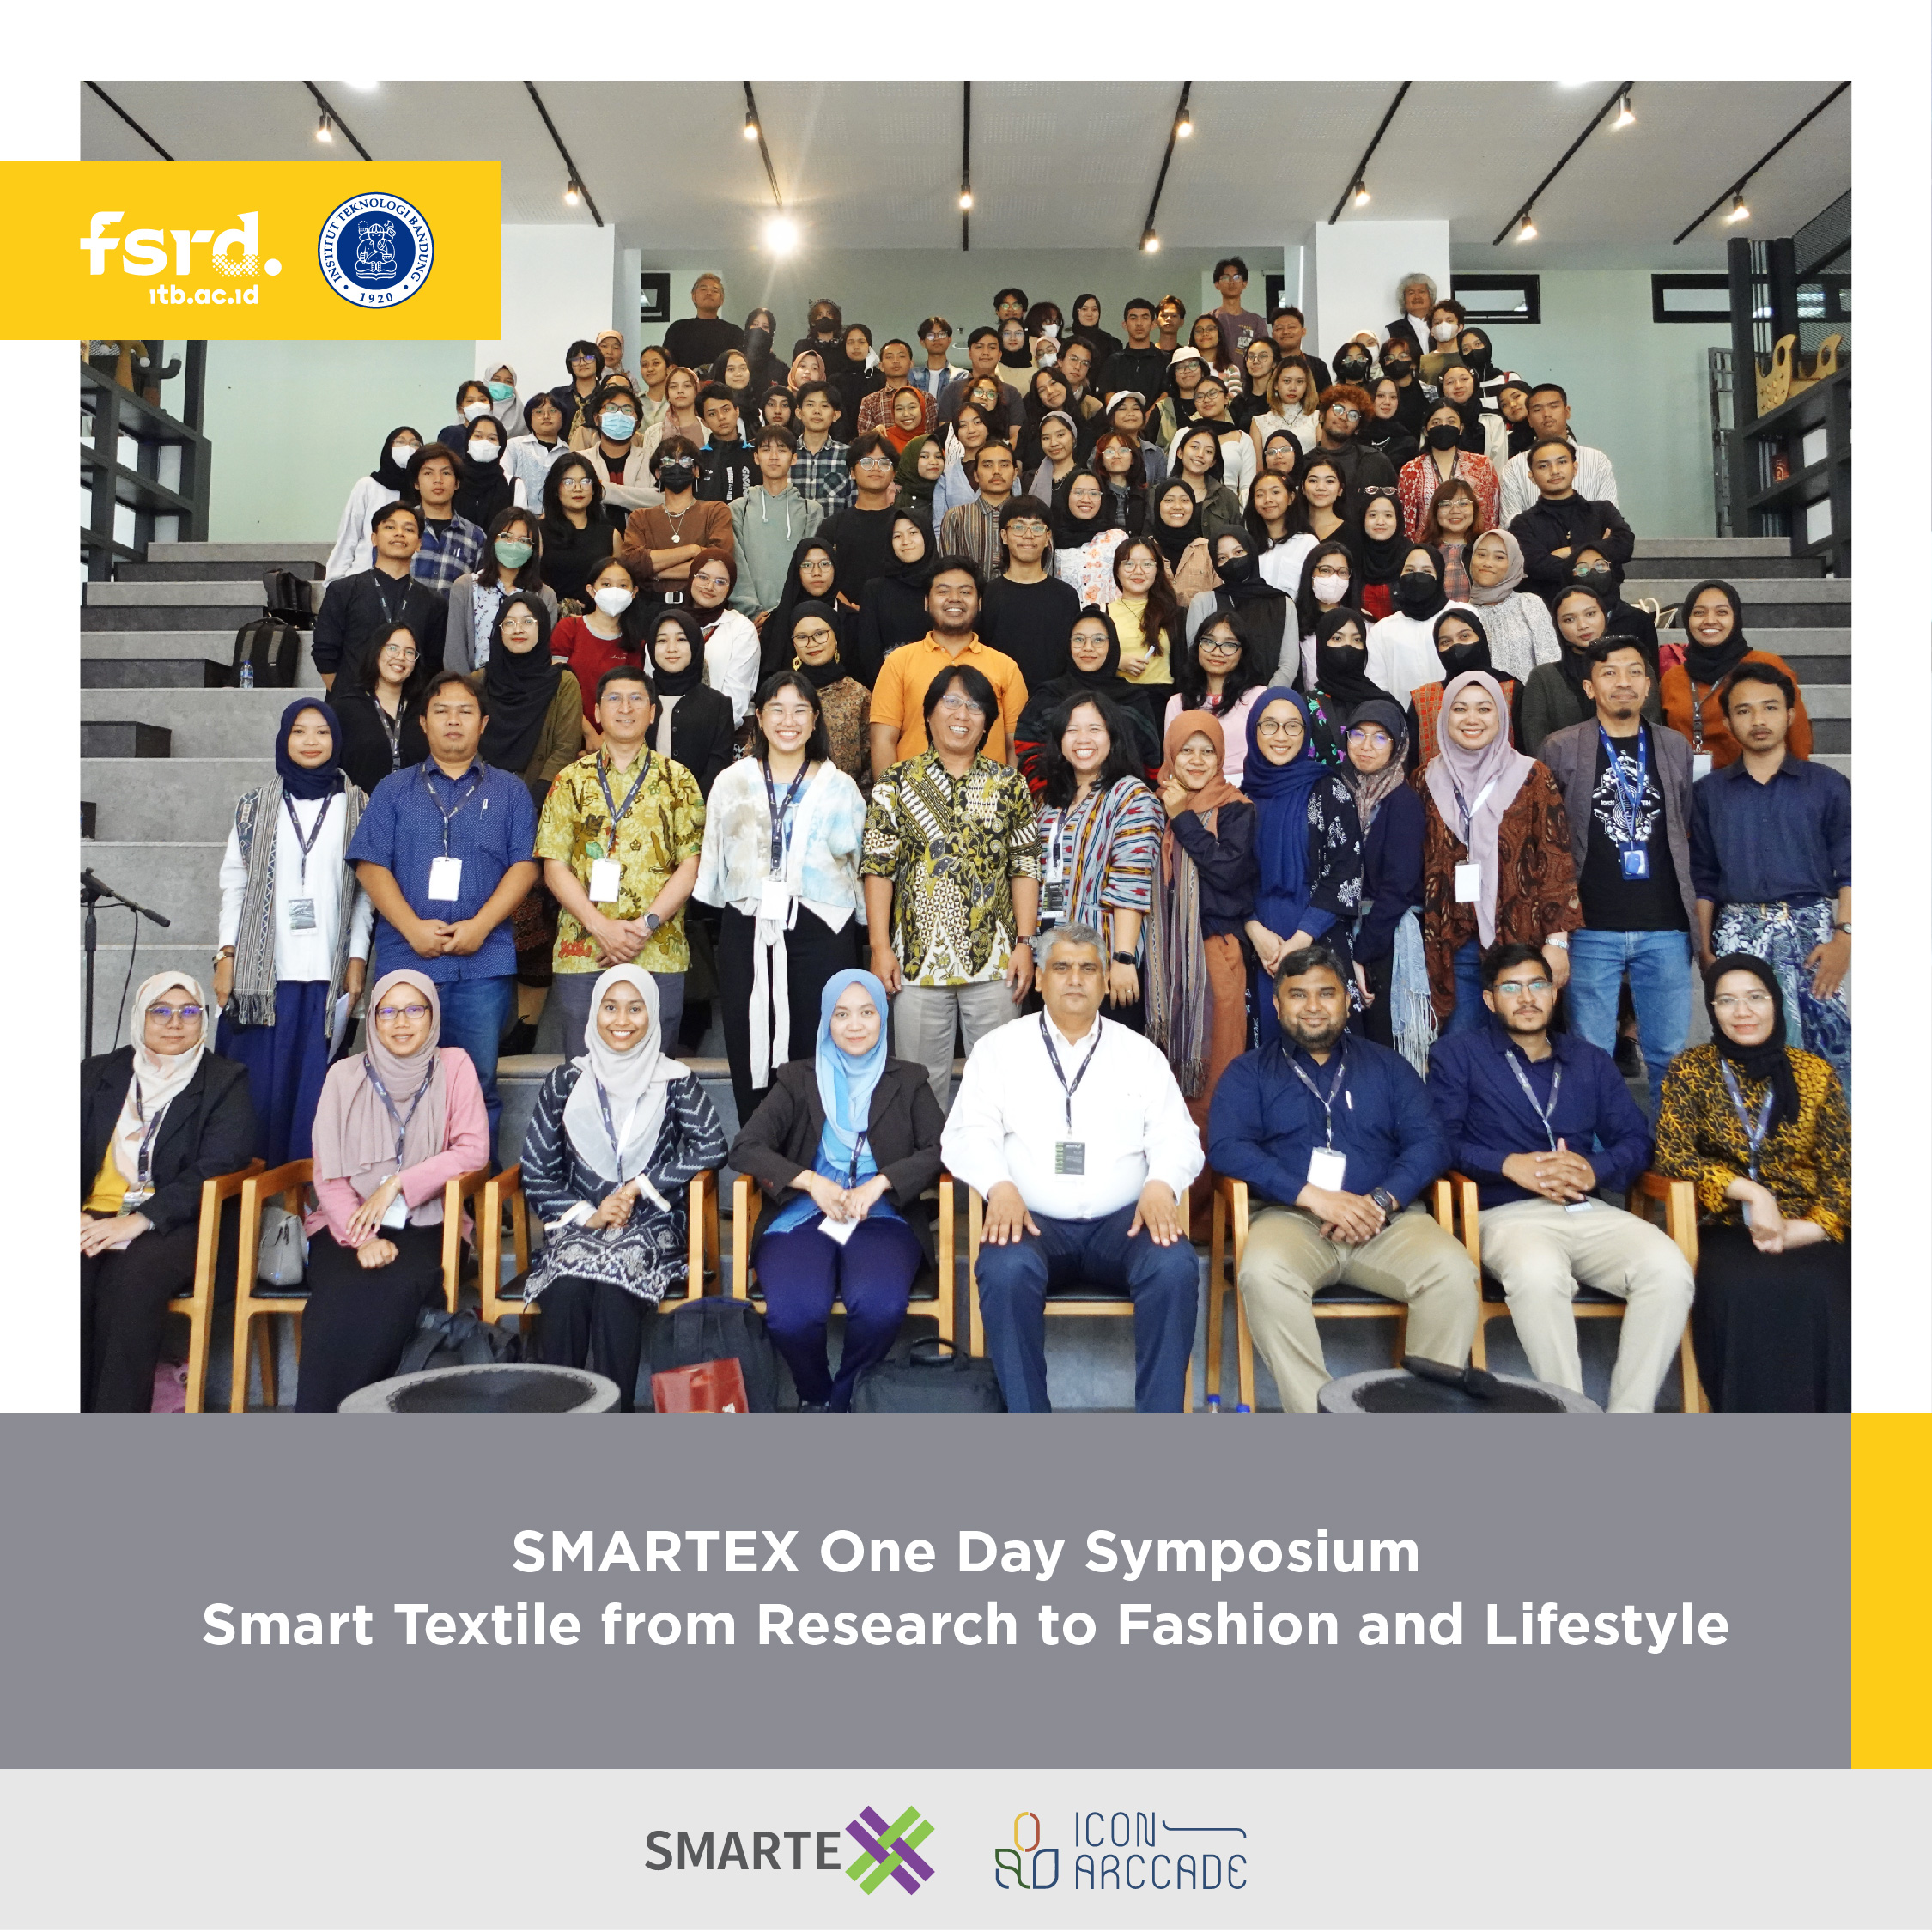 “SMARTEX One Day Symposium” Smart Textile from Research to Fashion and Lifestyle